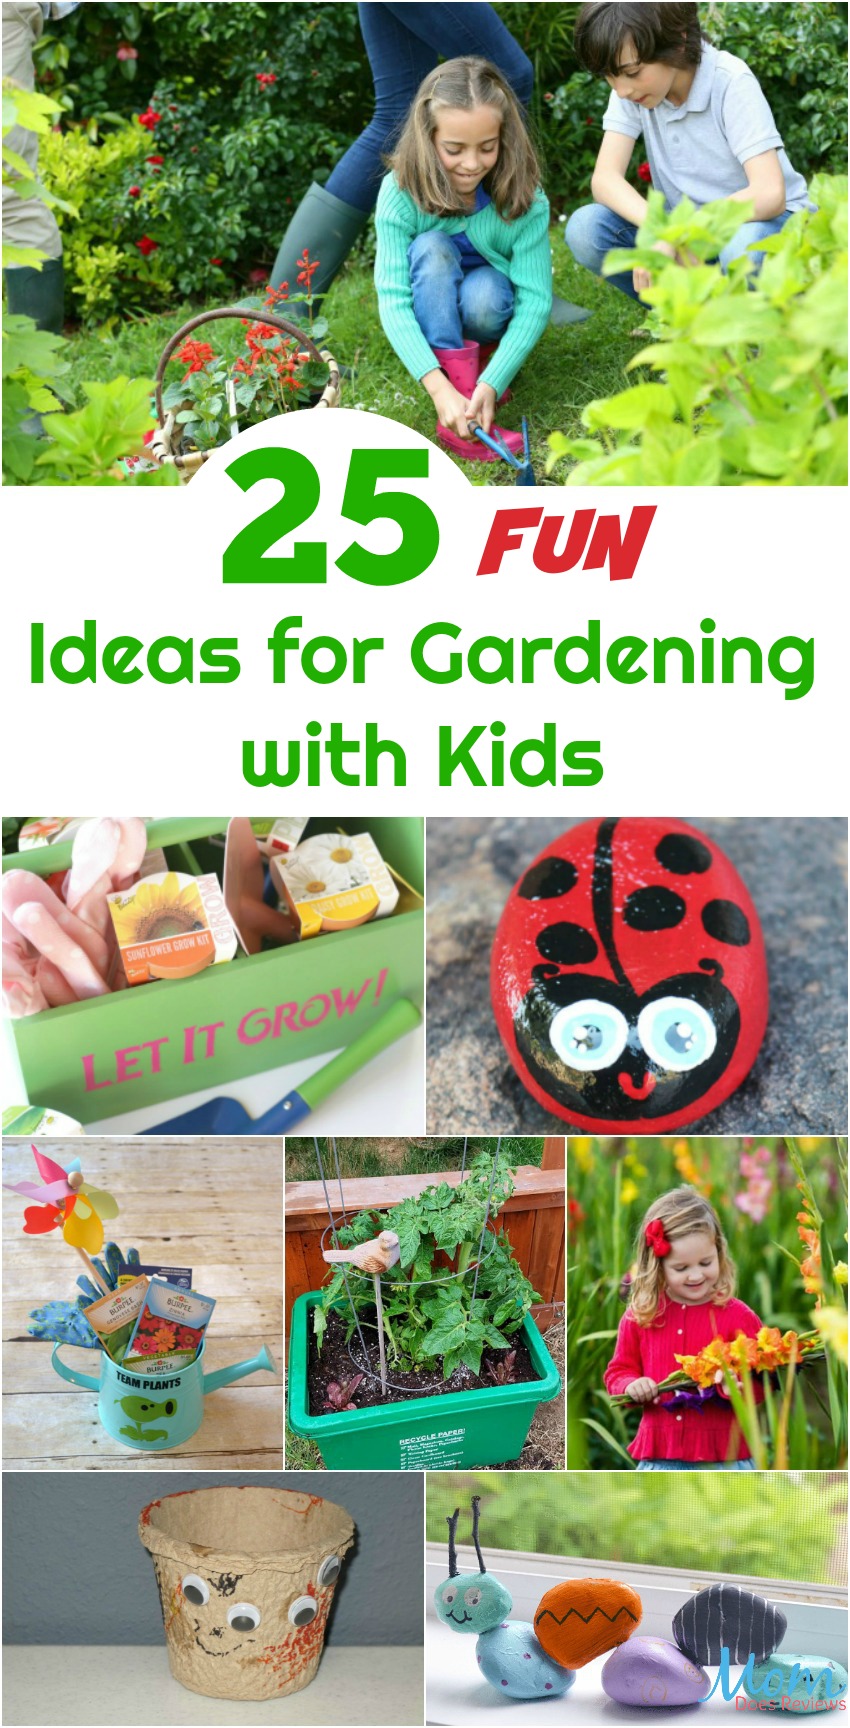 20 Fun Ideas for Gardening with Kids to Spark Their Interest   Mom ...